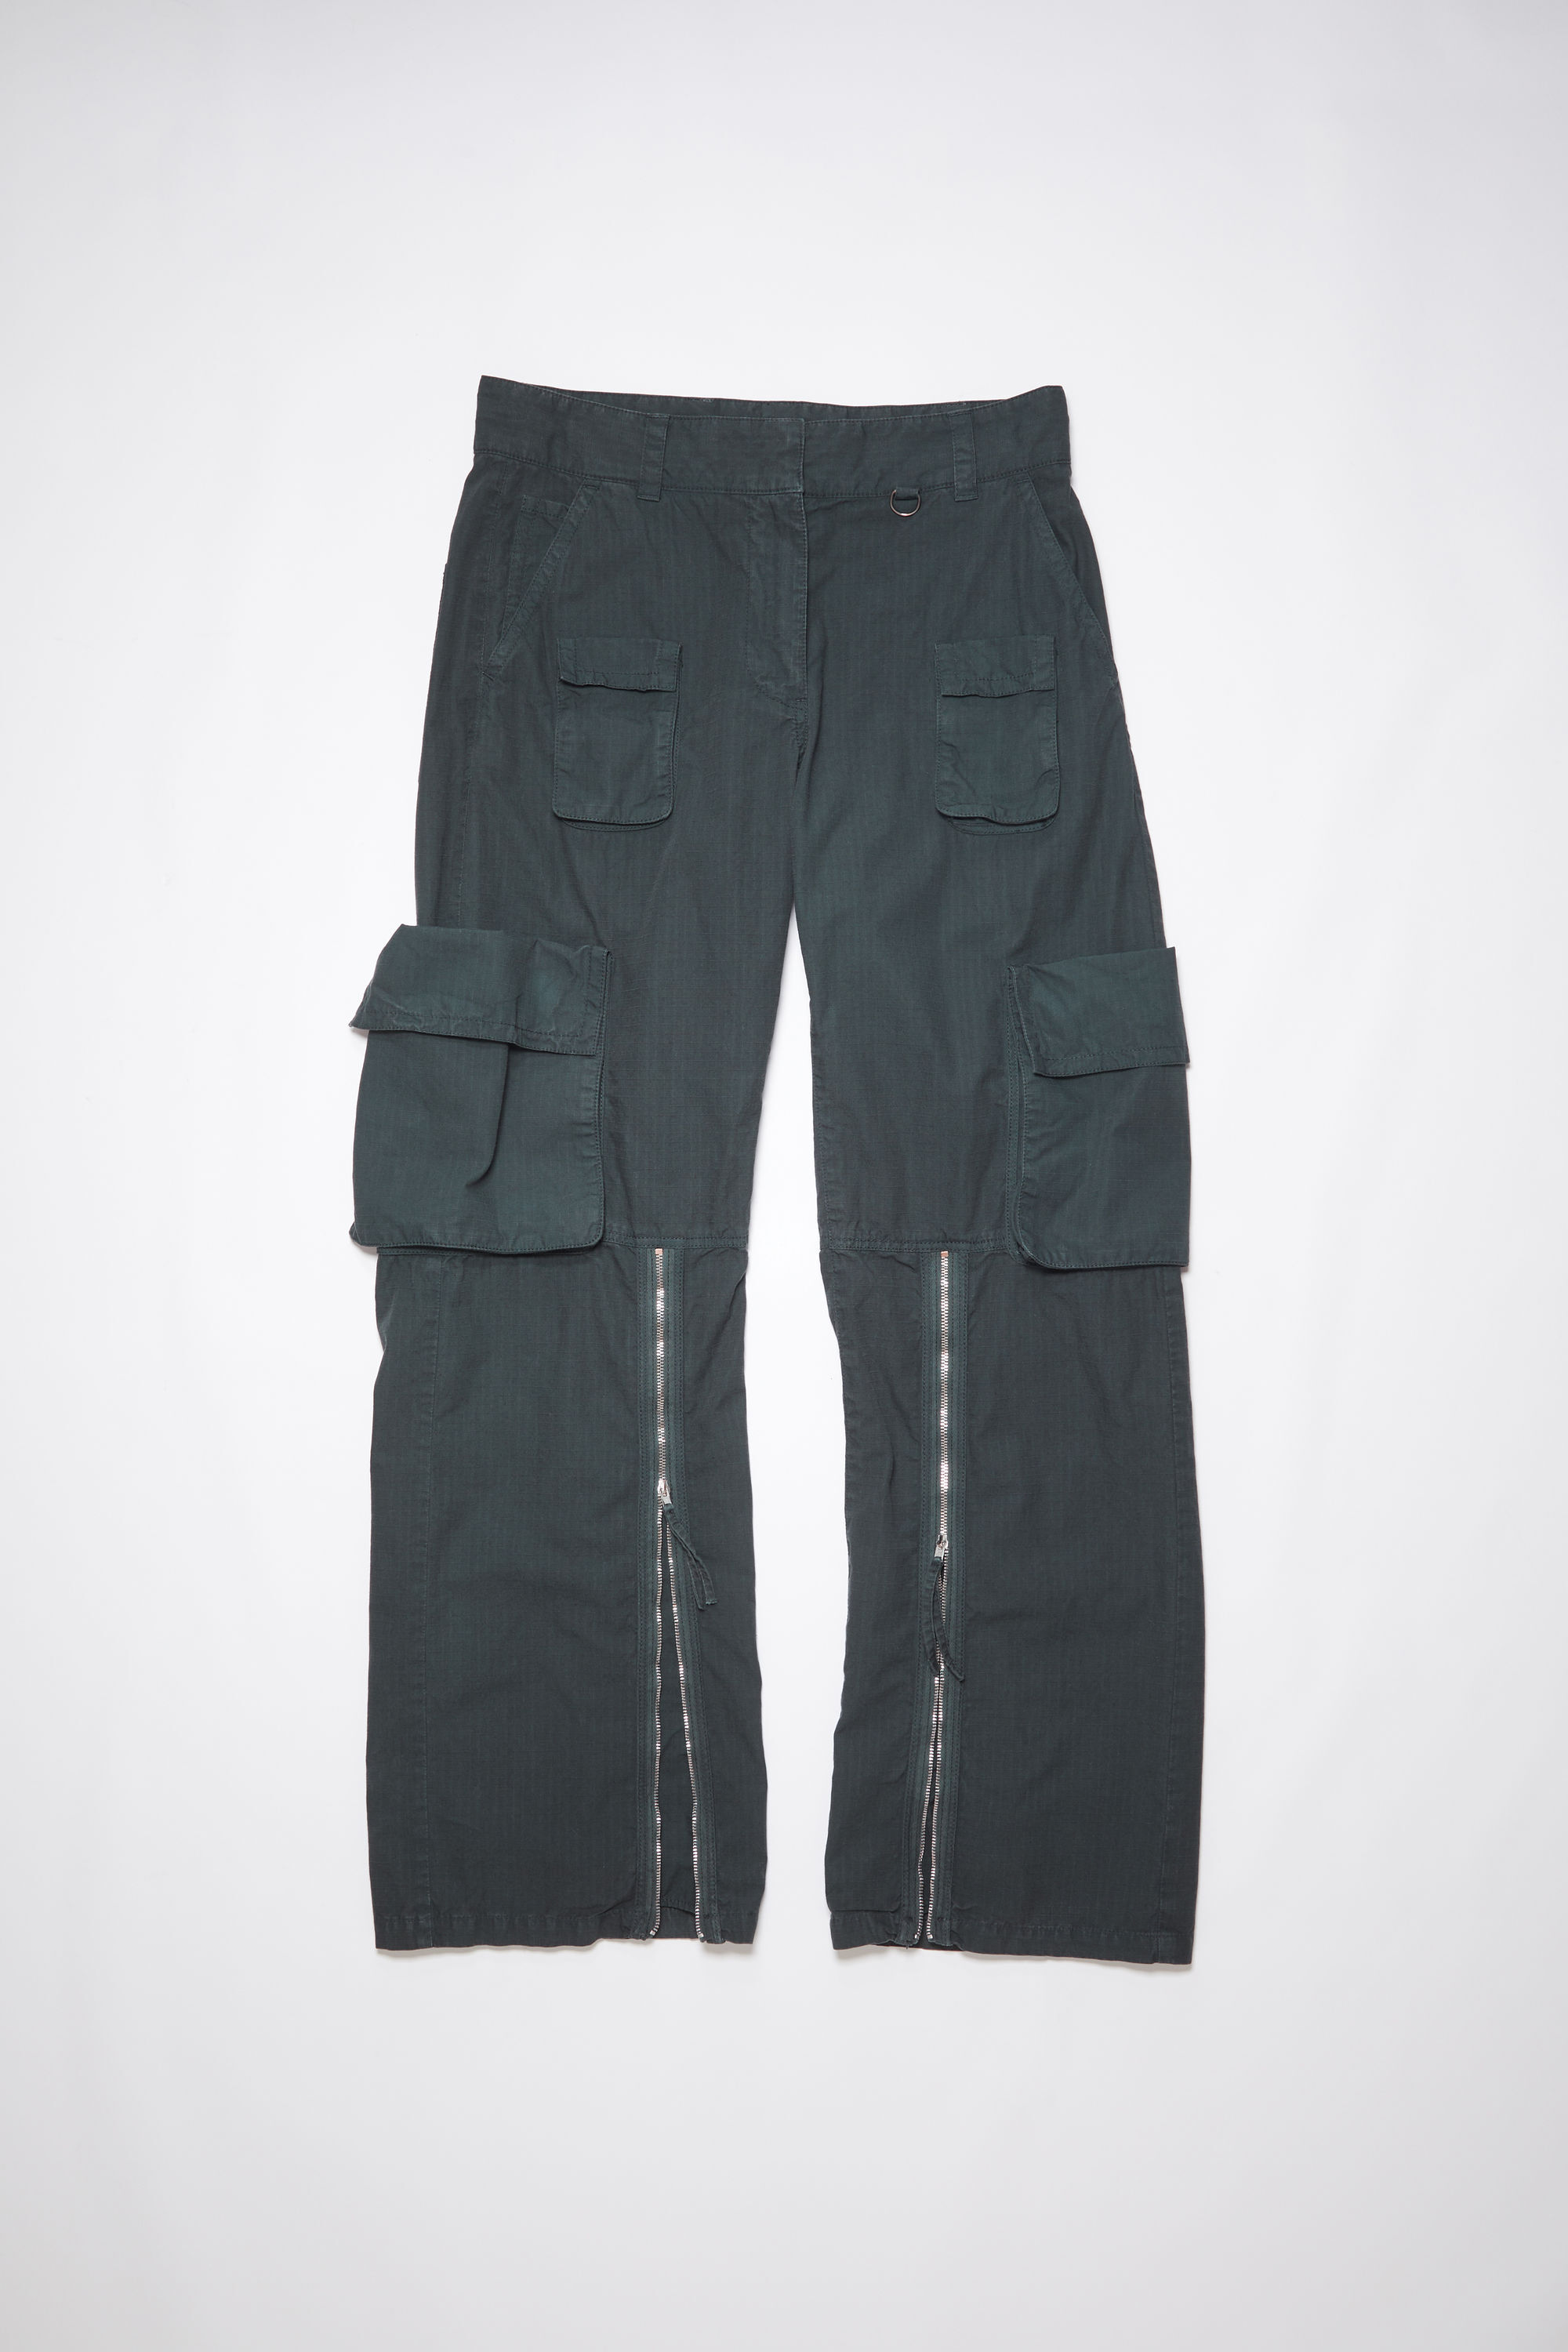 Acne Studios - Zippered trousers - Charcoal Grey